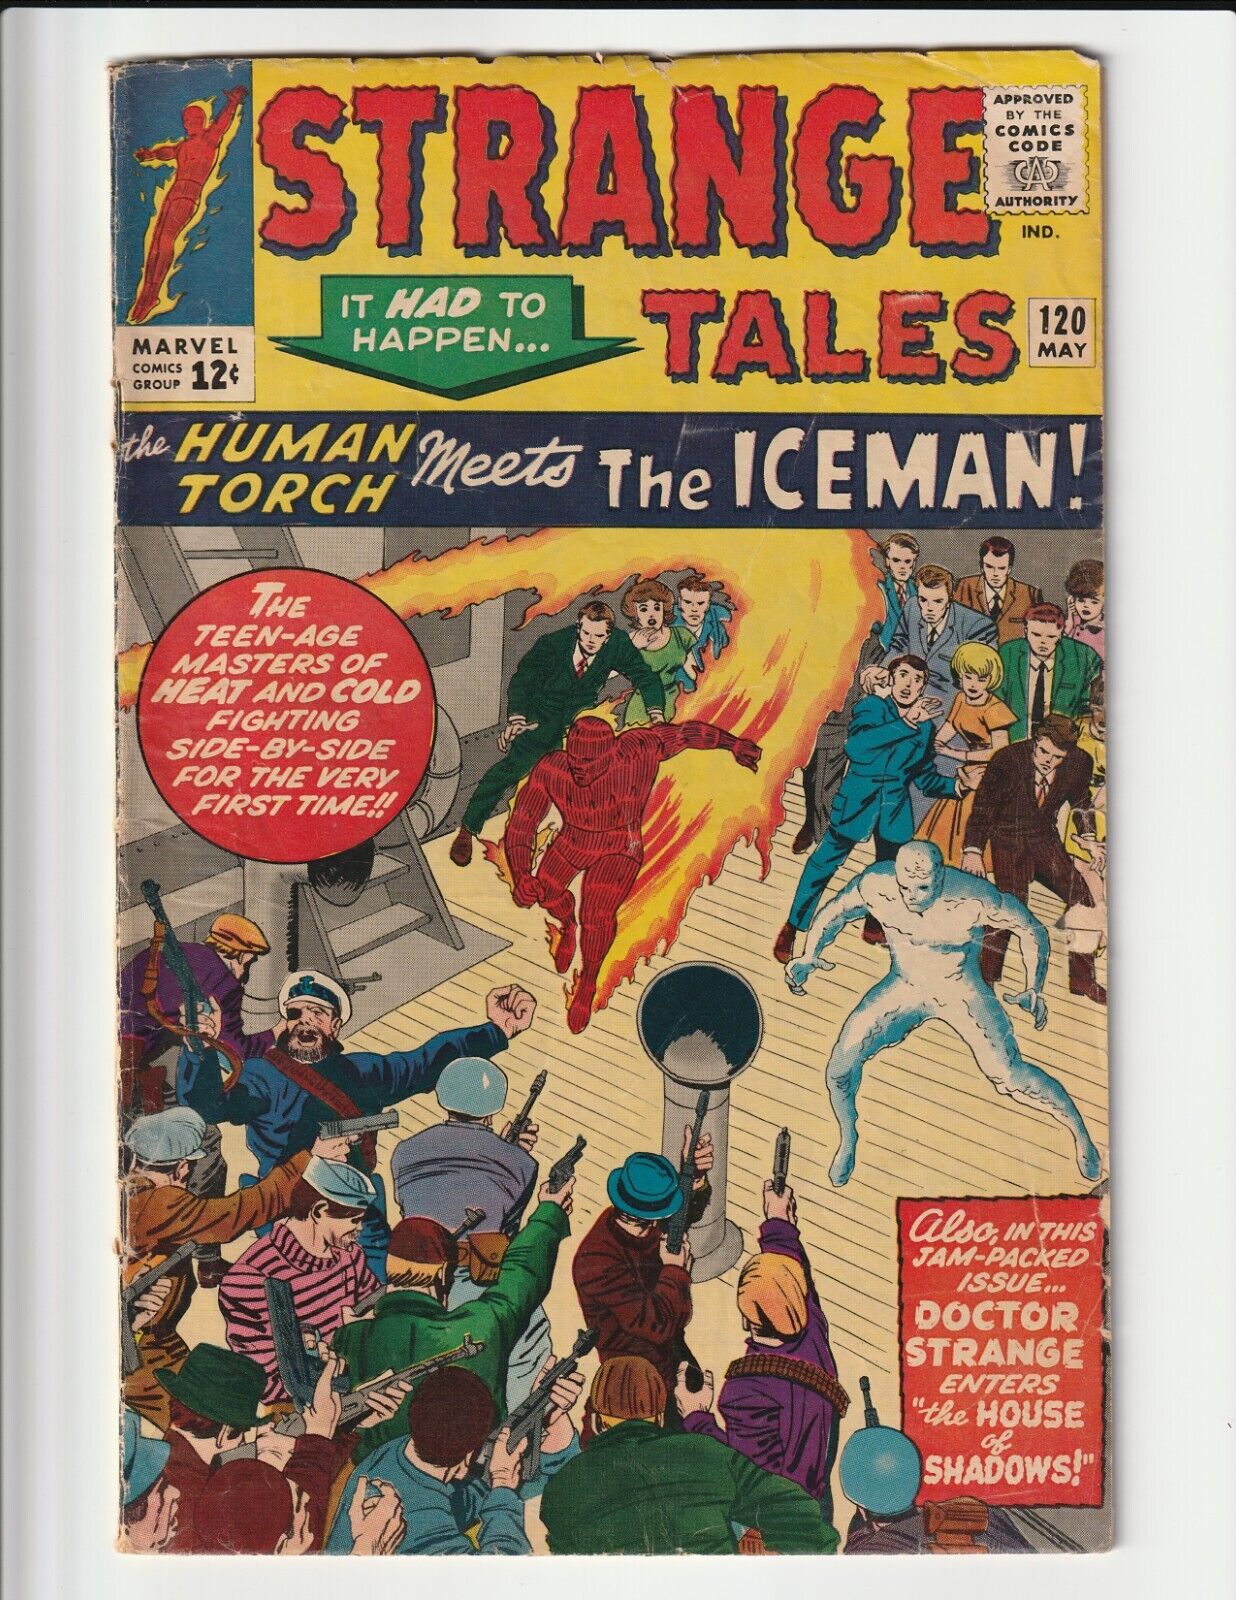 STRANGE TALES #120 (1964) FIRST TEAM UP OF HUMAN TORCH & ICEMAN MARVEL STAN LEE